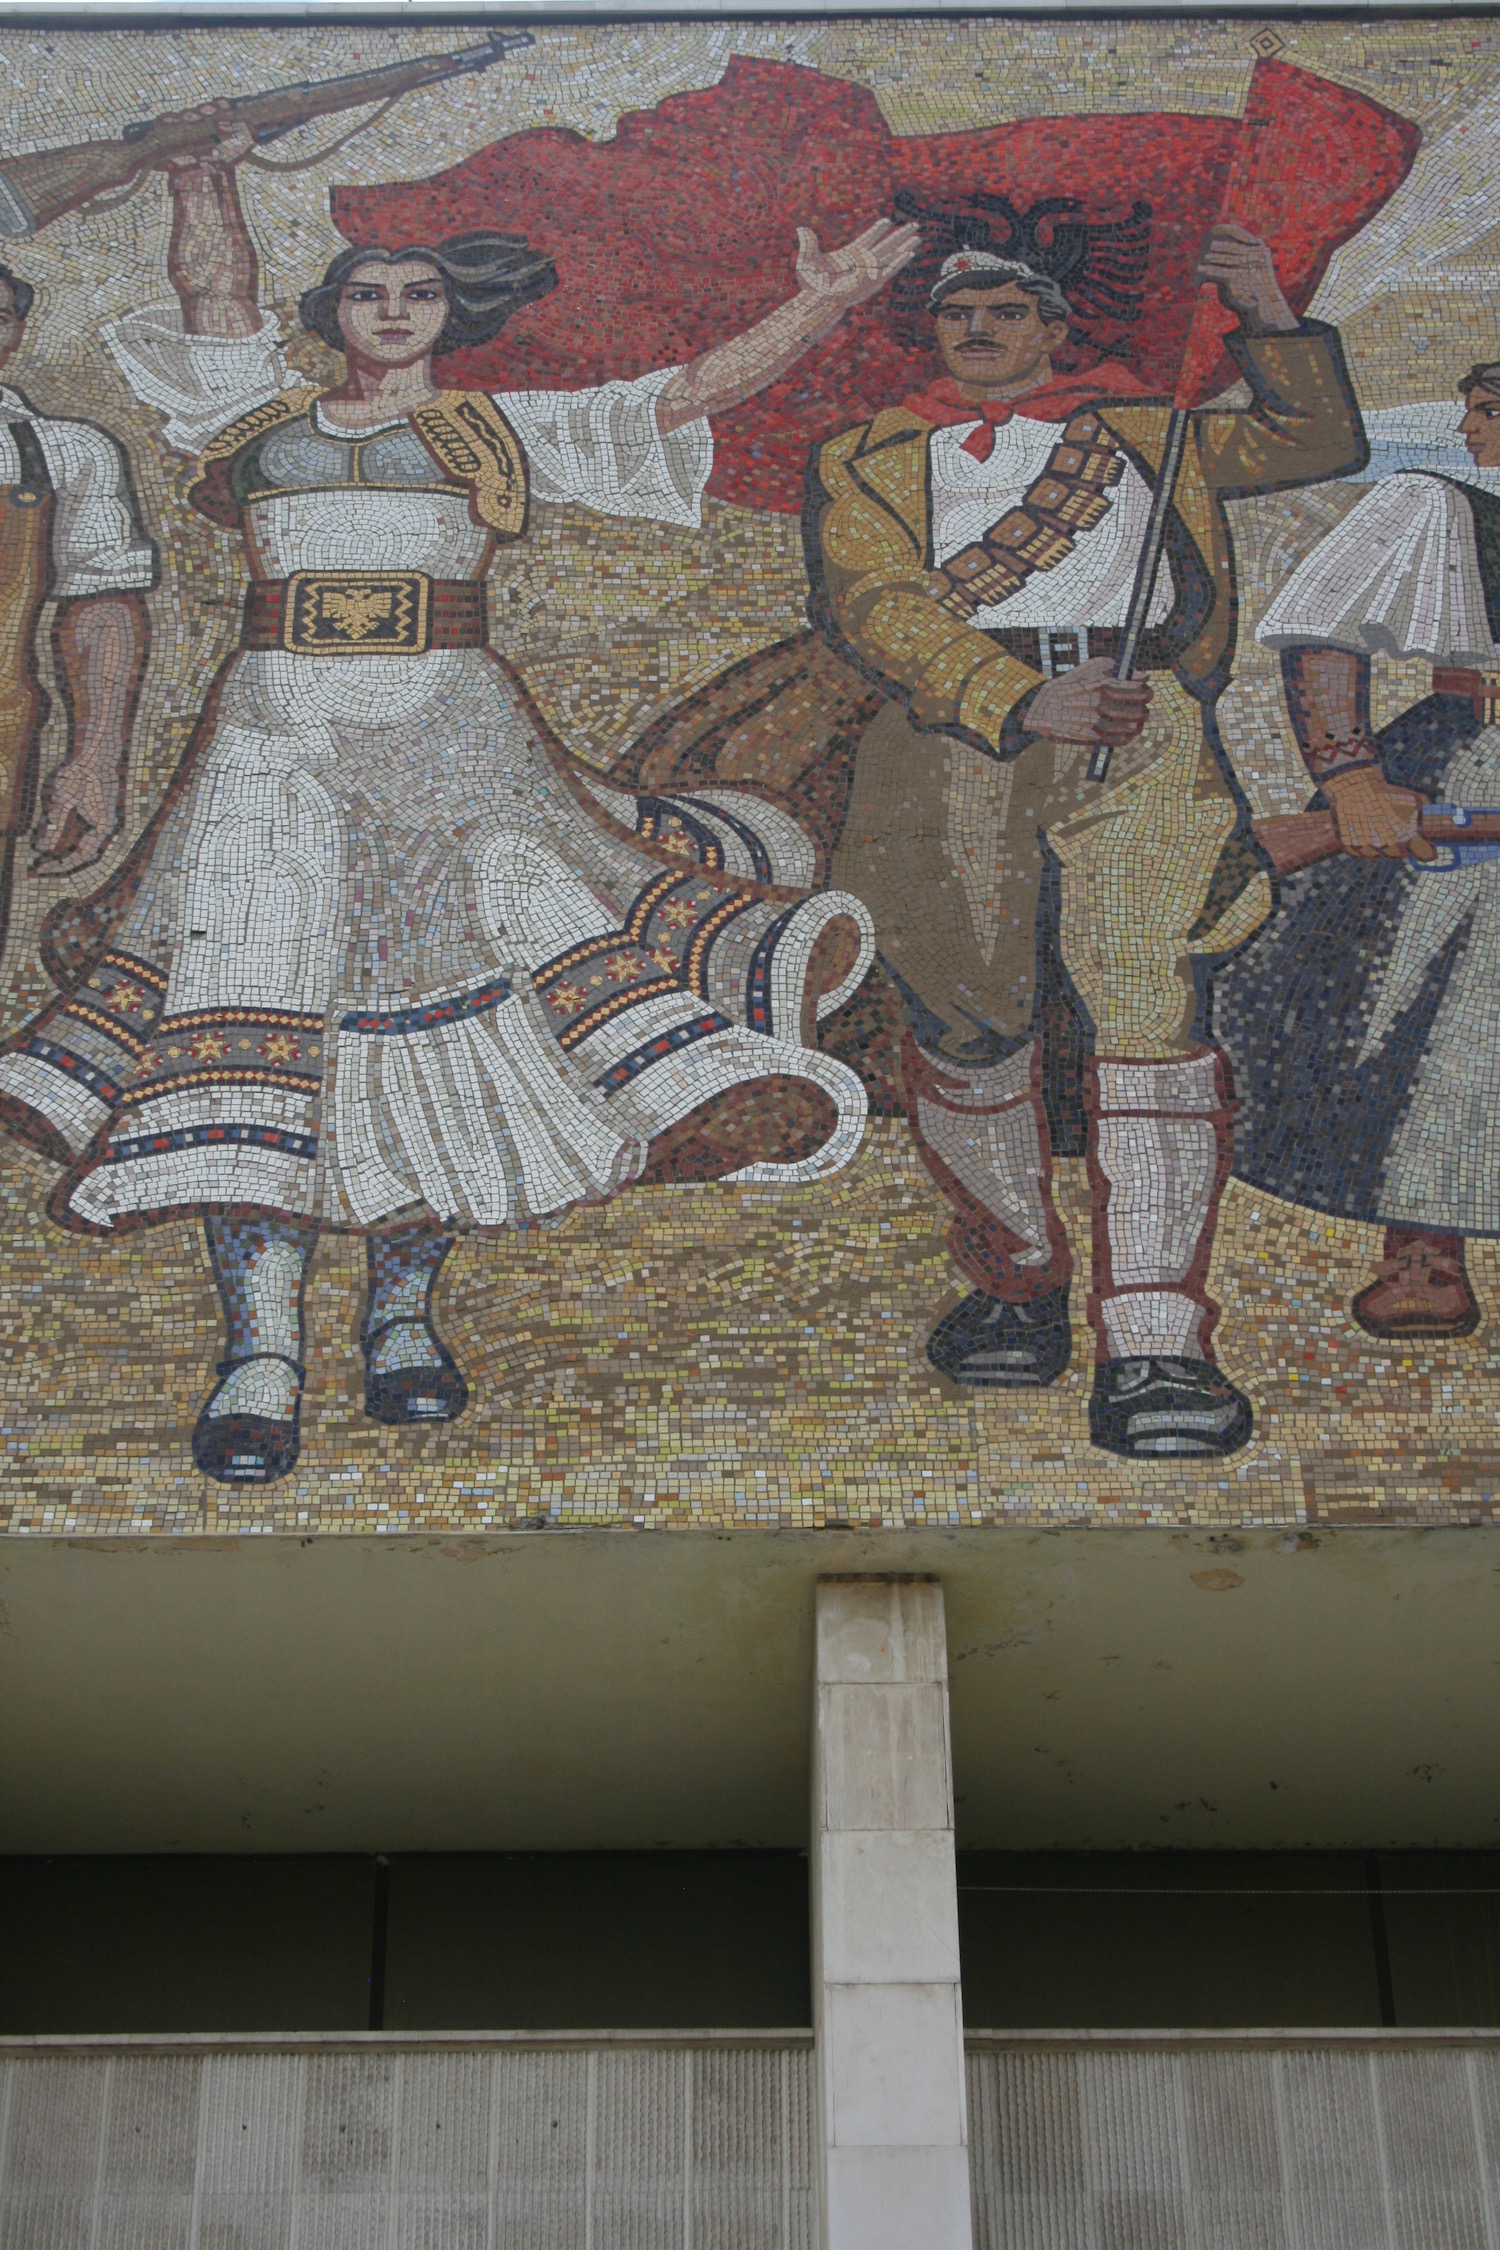 a mosaic of people on a wall